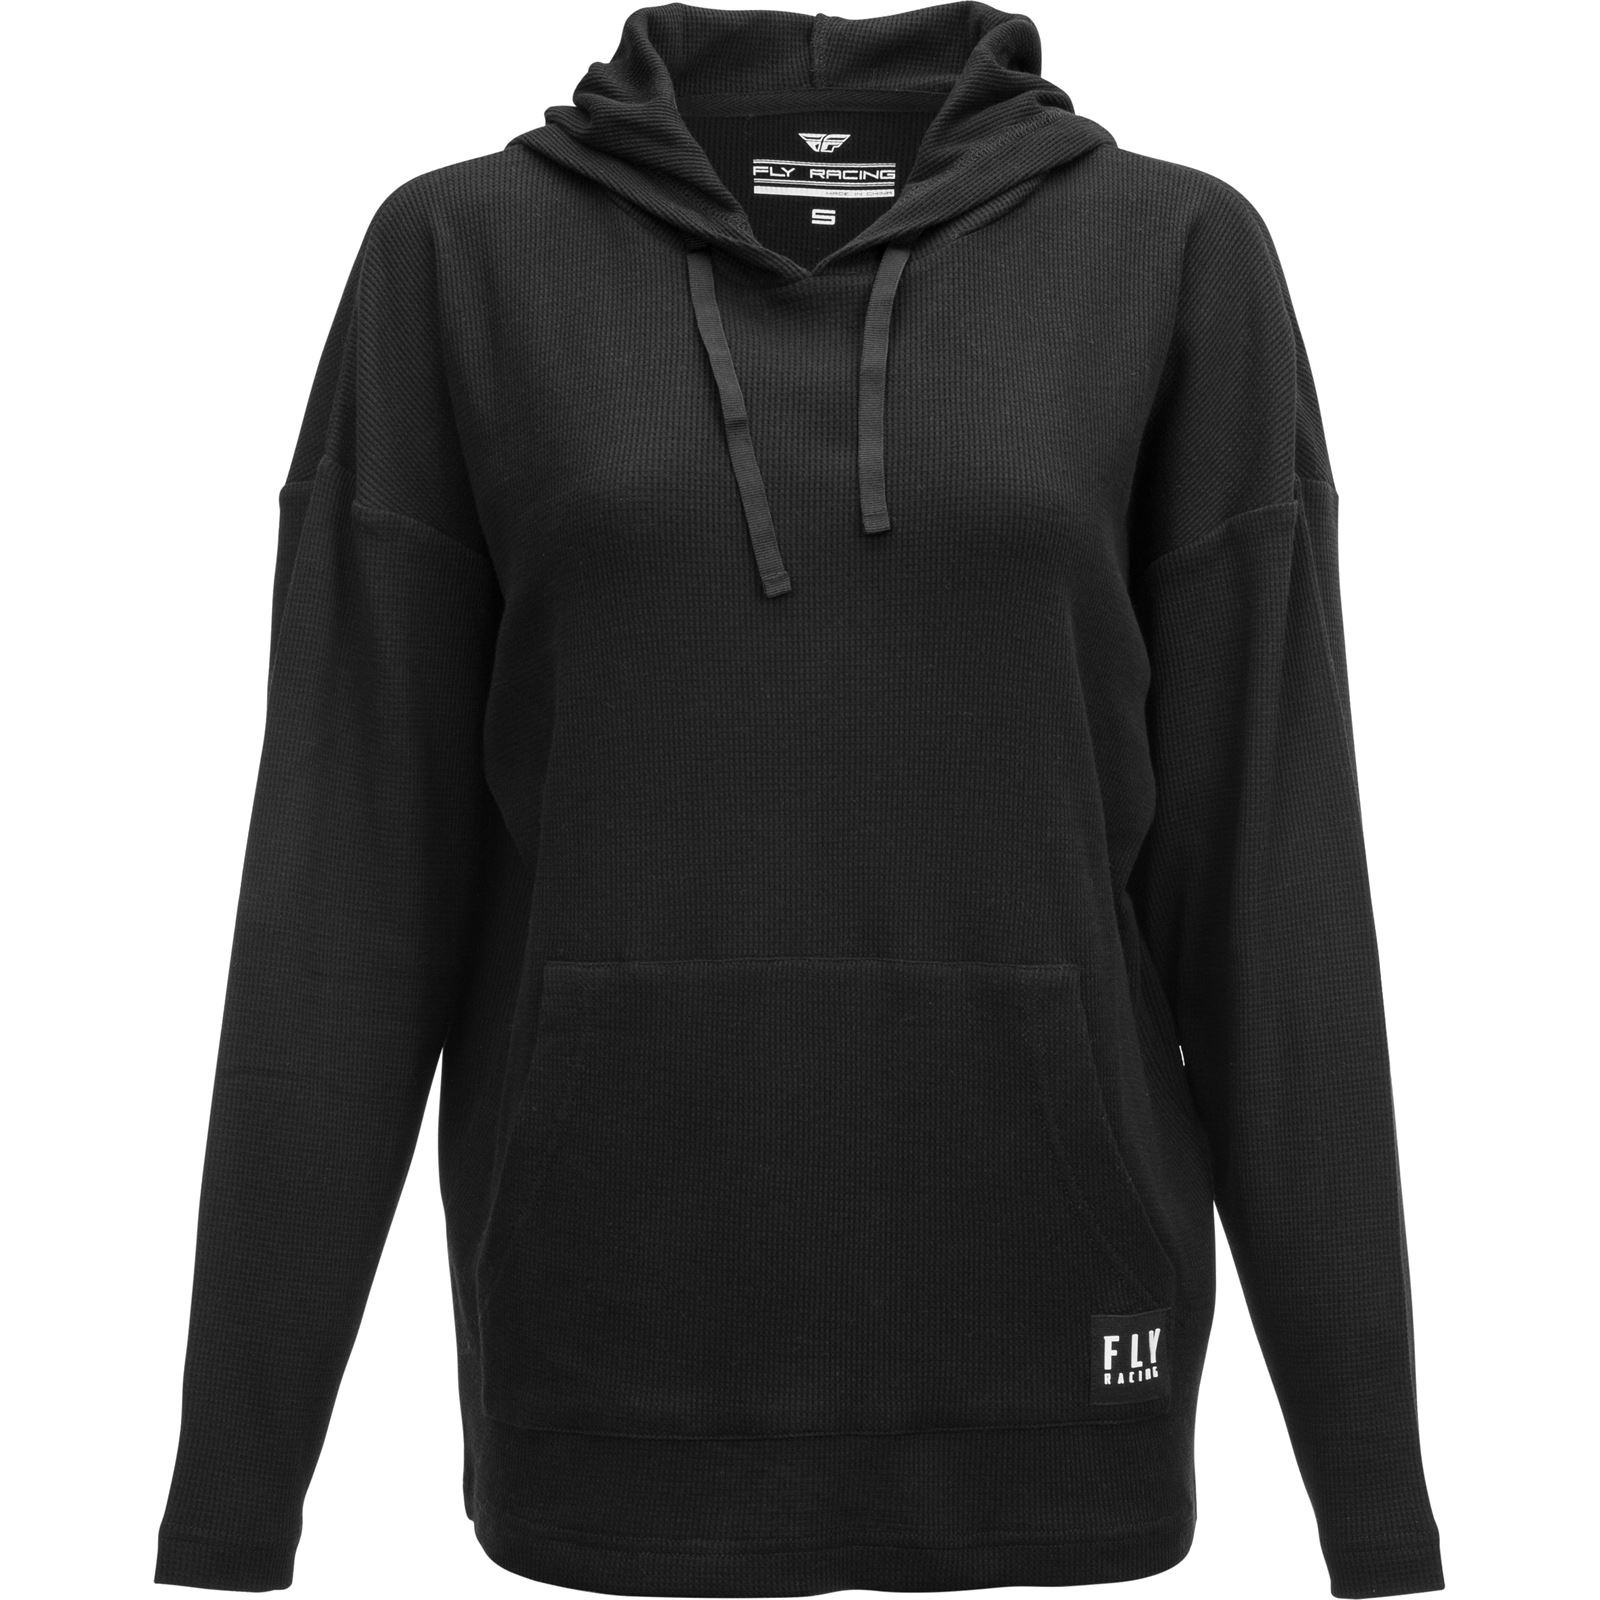 Fly Racing Women's Fly Oversized Hoodie Black 2X-Large